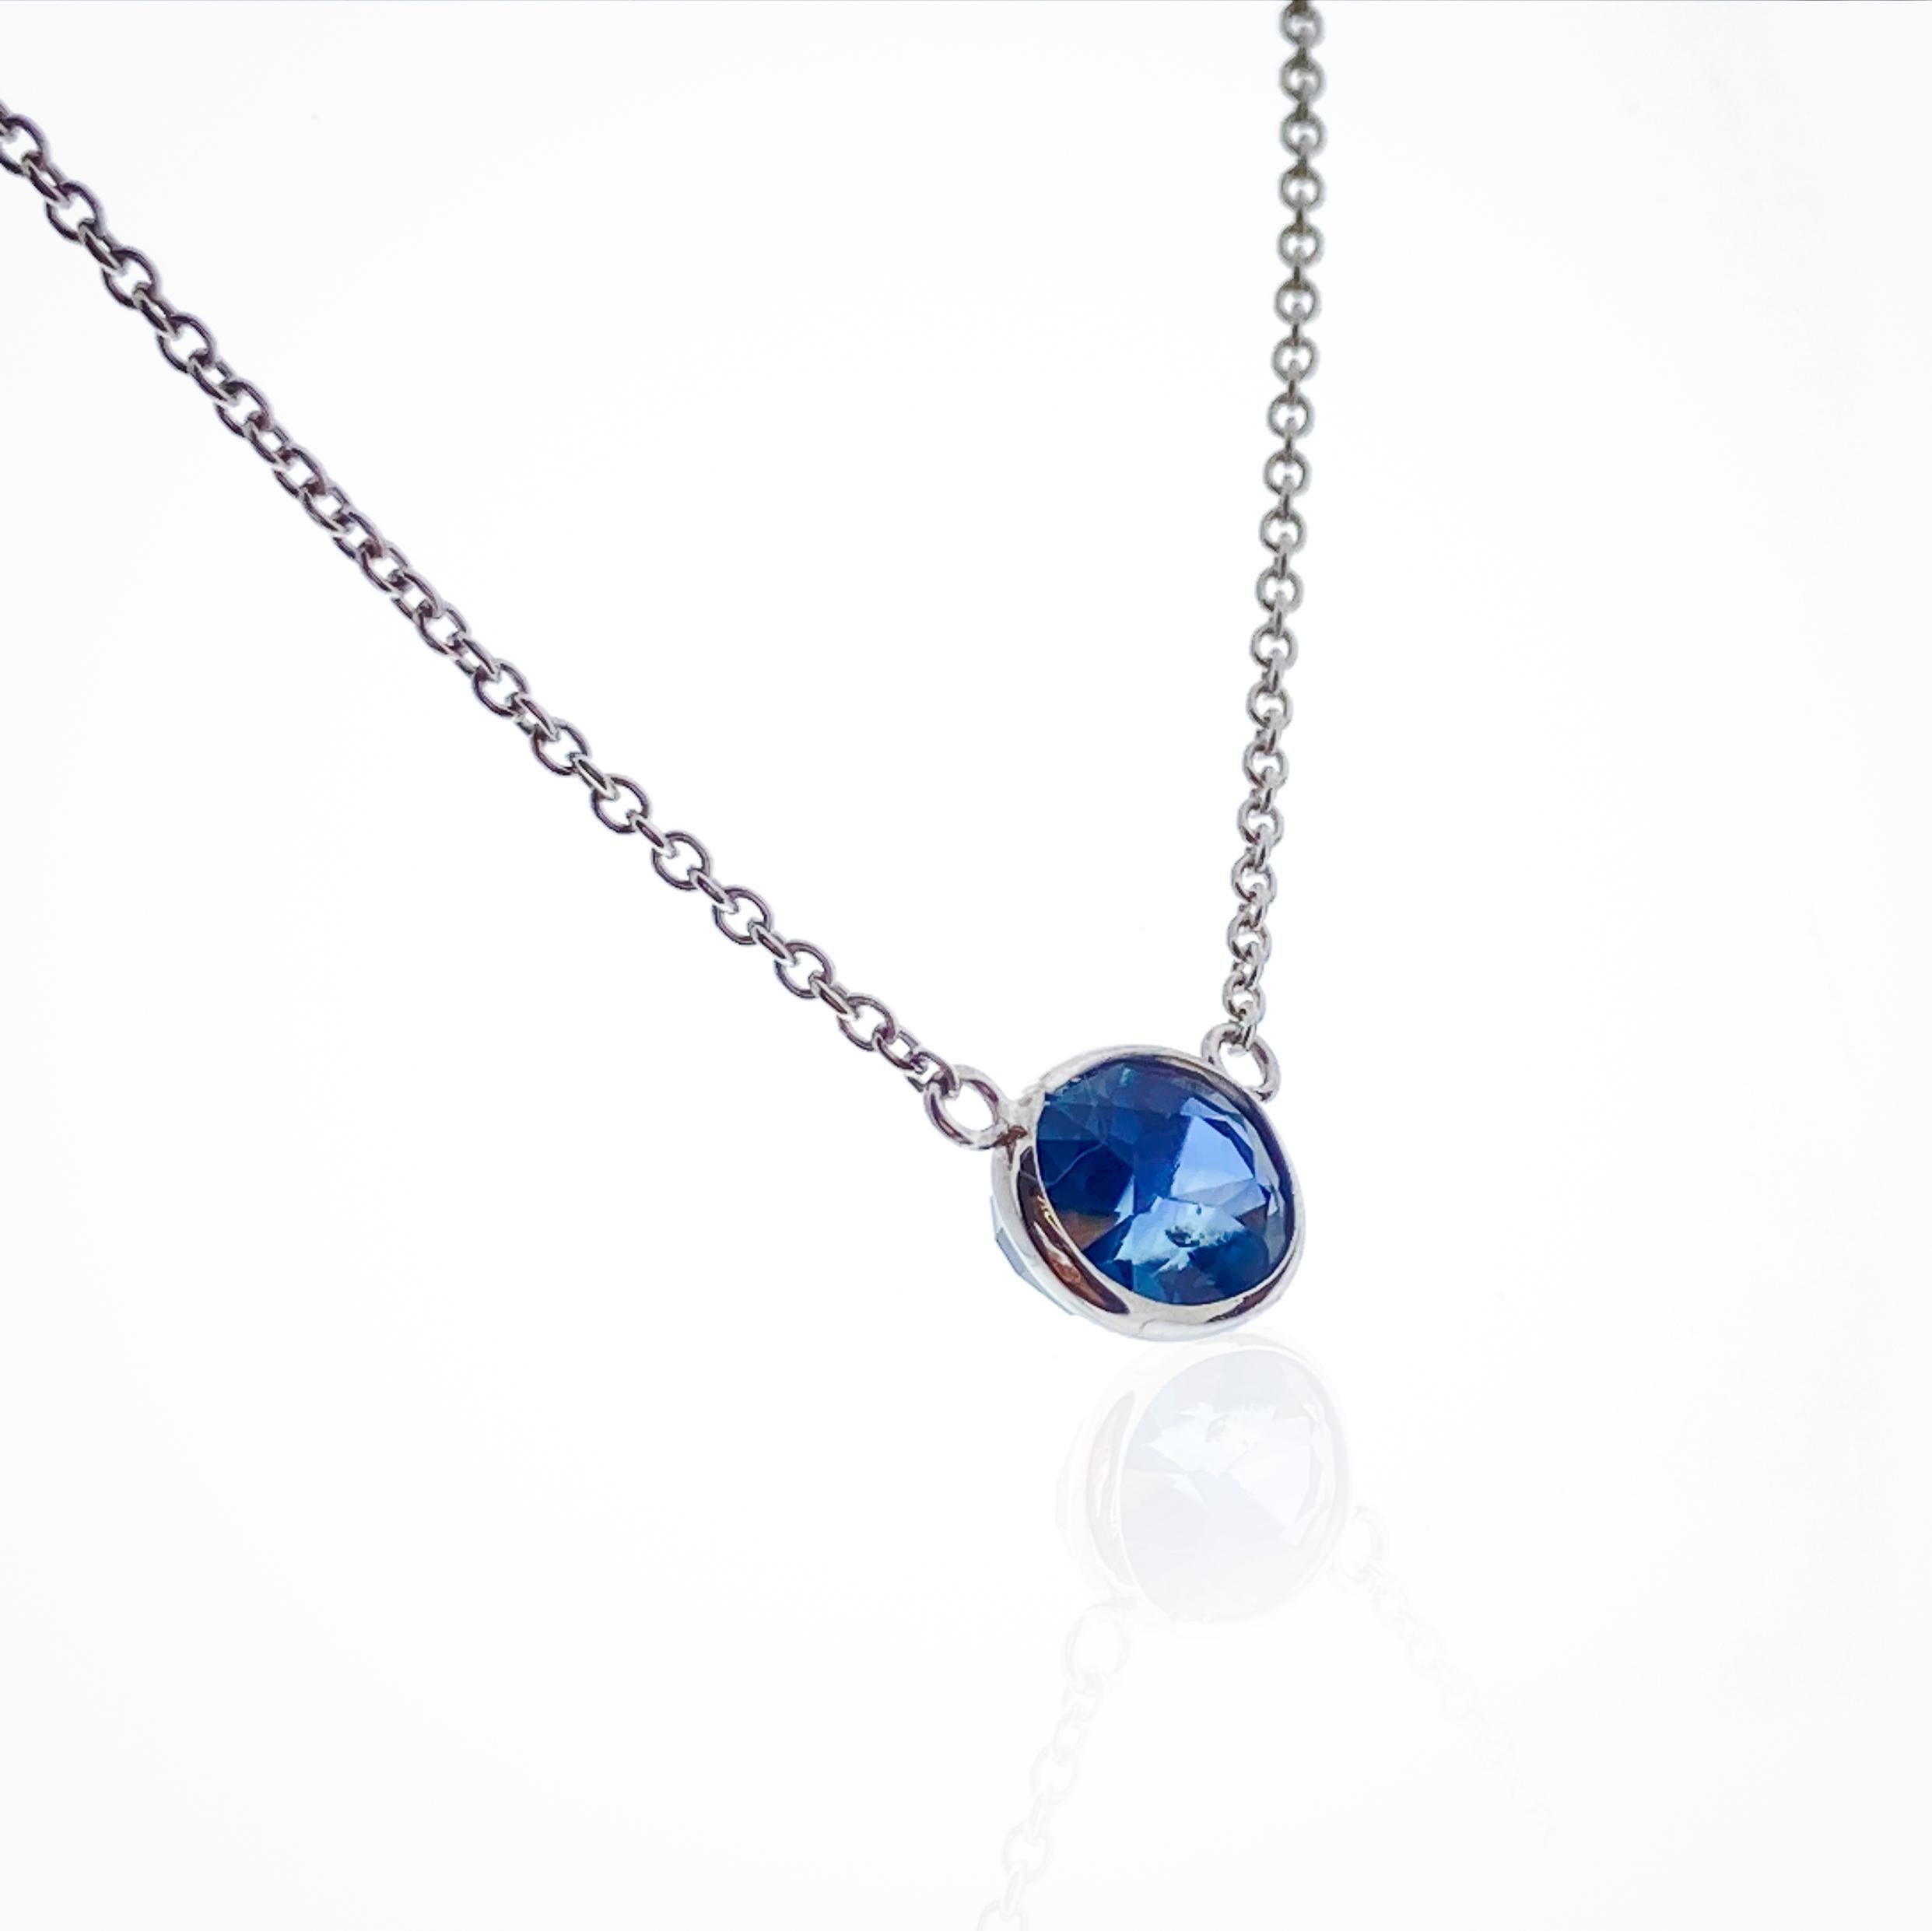 Contemporary 1.99 Carat Blue Oval Sapphire Fashion Necklaces In 14K White Gold  For Sale